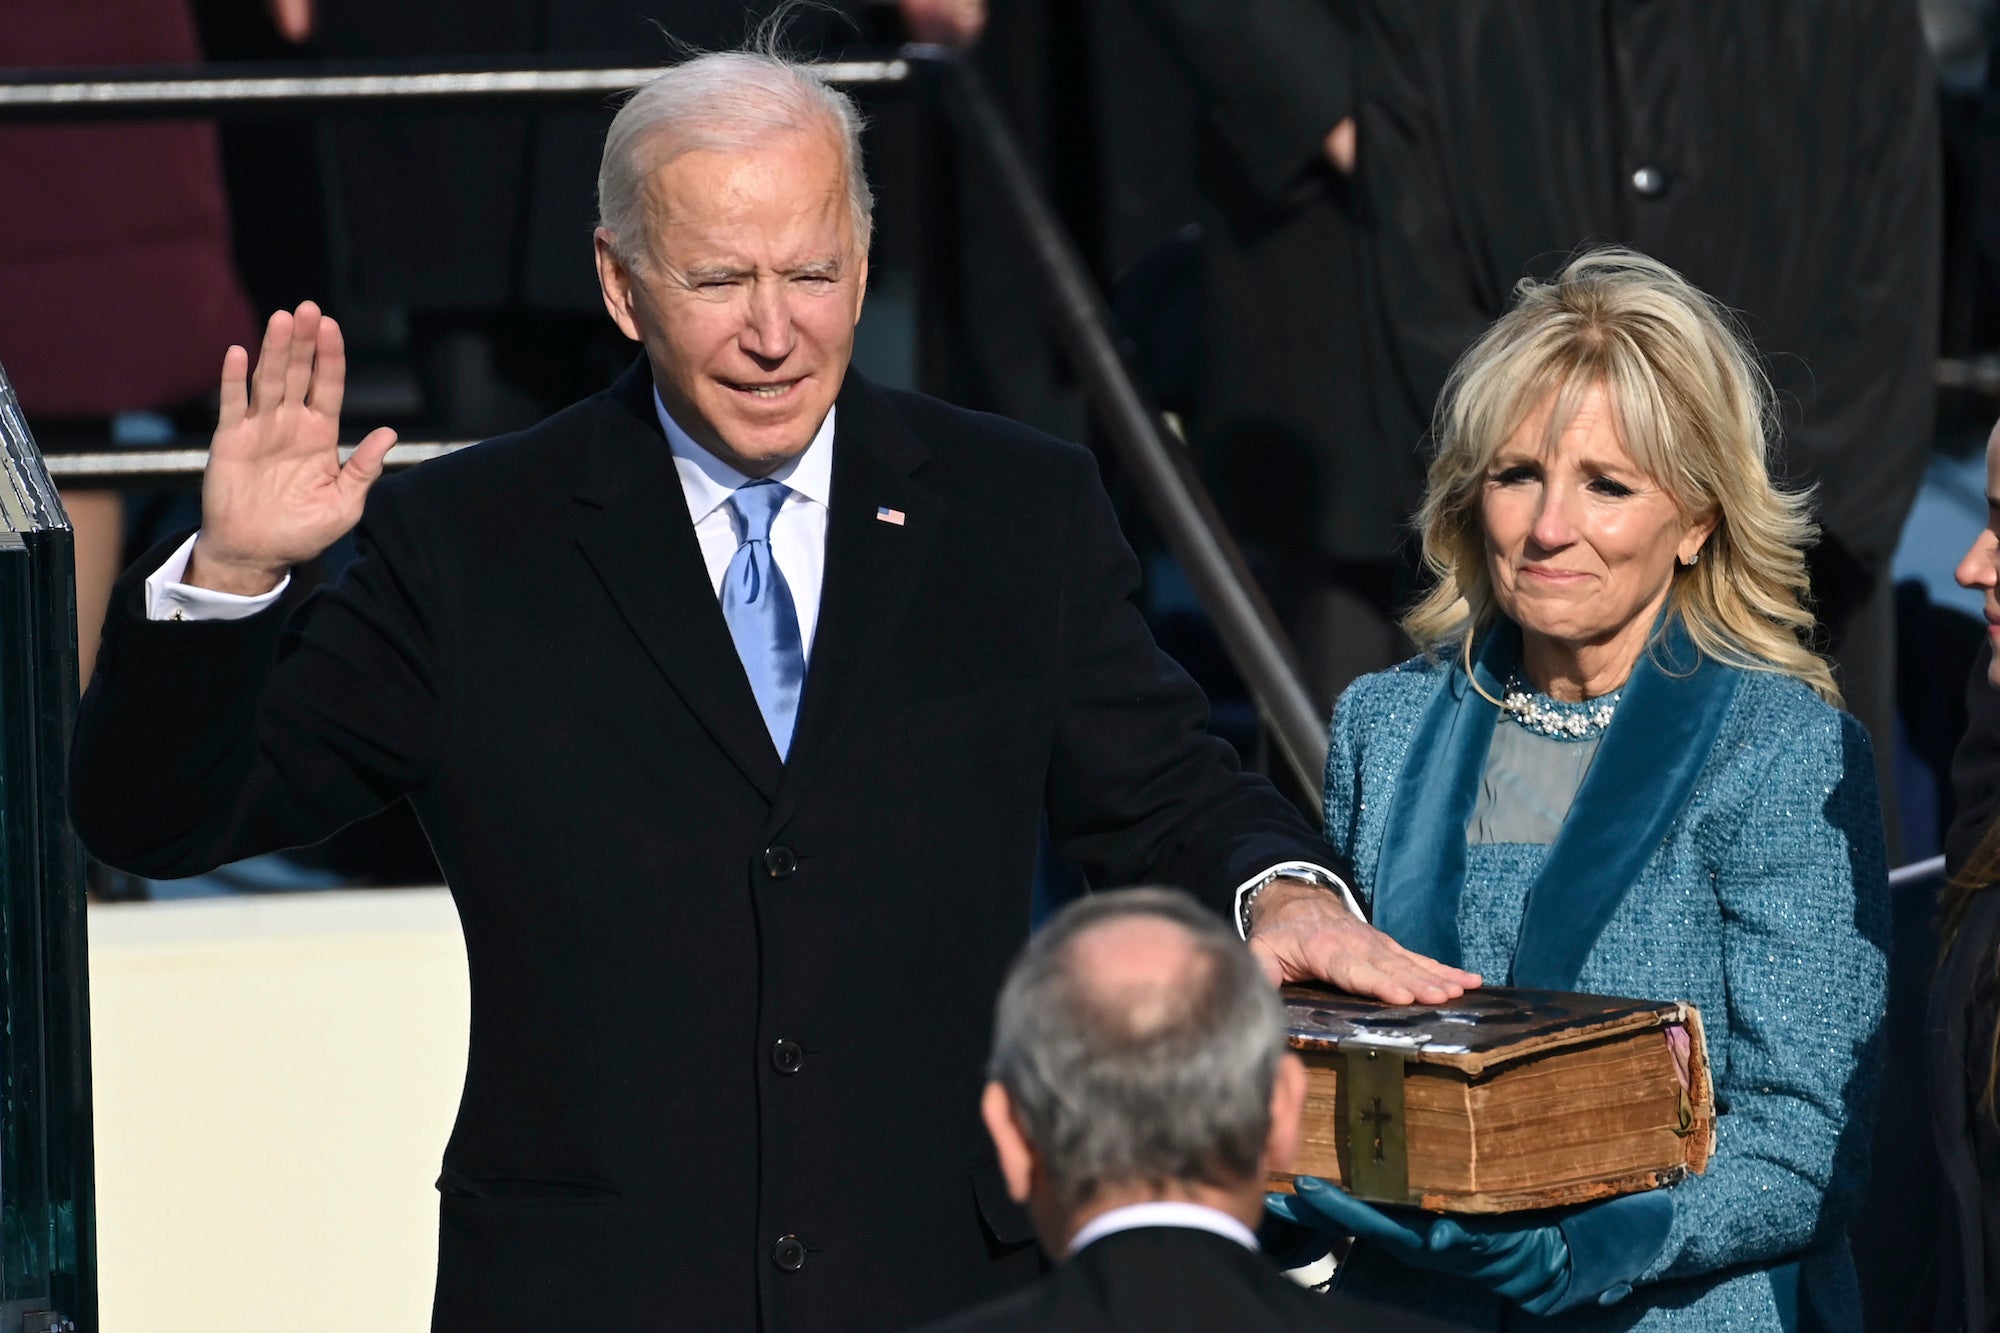 Joe Biden is sworn in as the 46th president of the United States by Chief Justice John Roberts